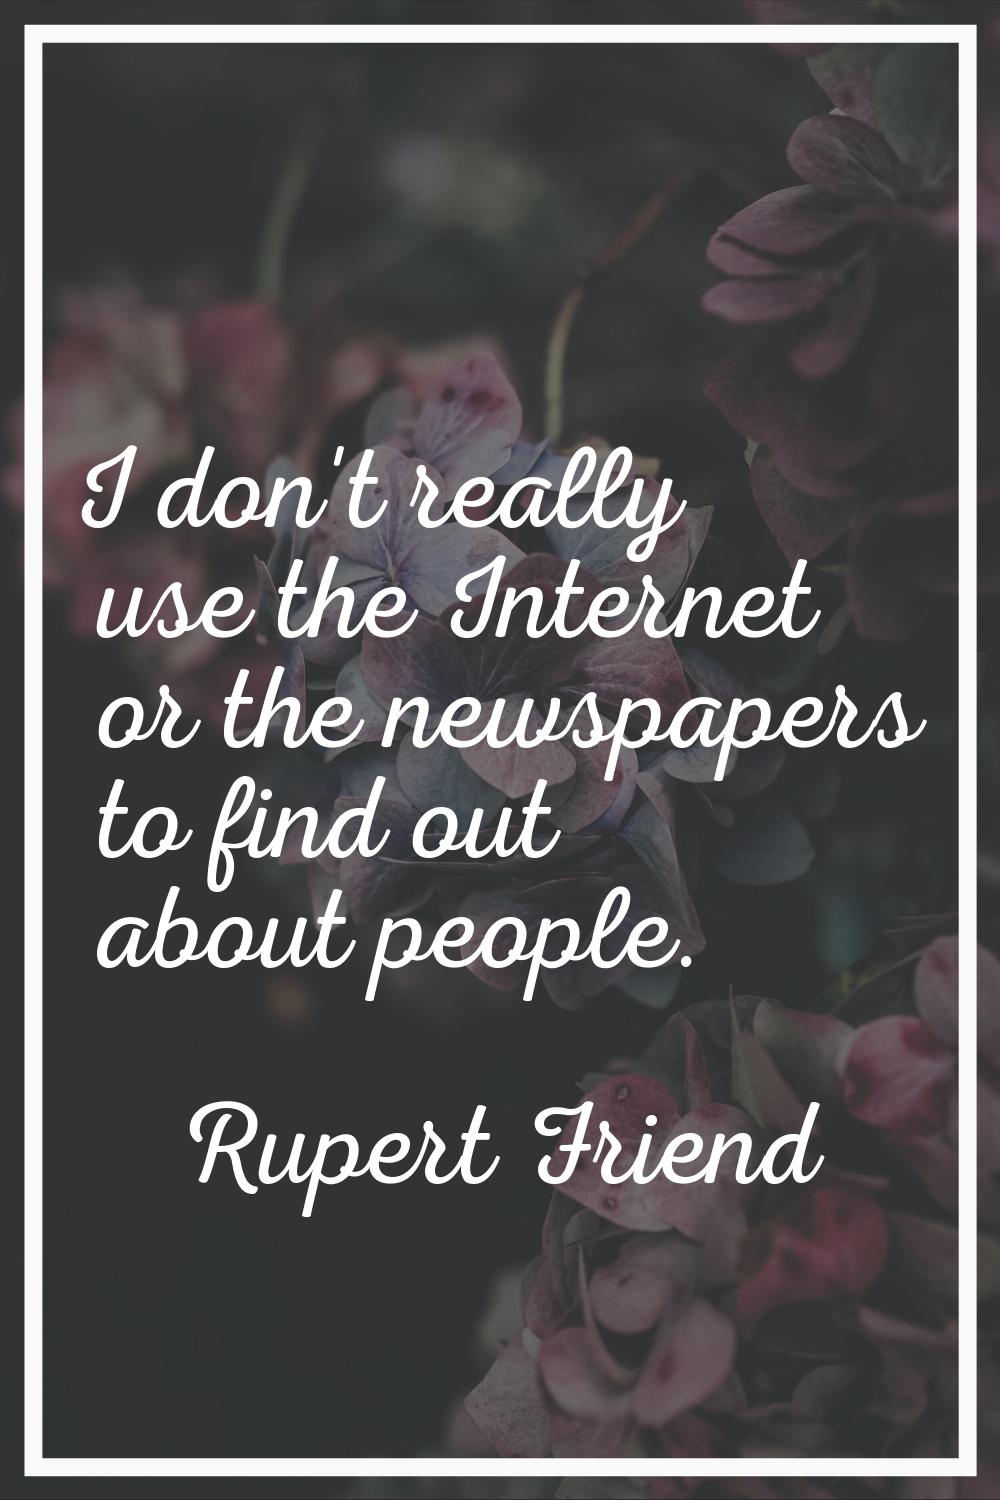 I don't really use the Internet or the newspapers to find out about people.